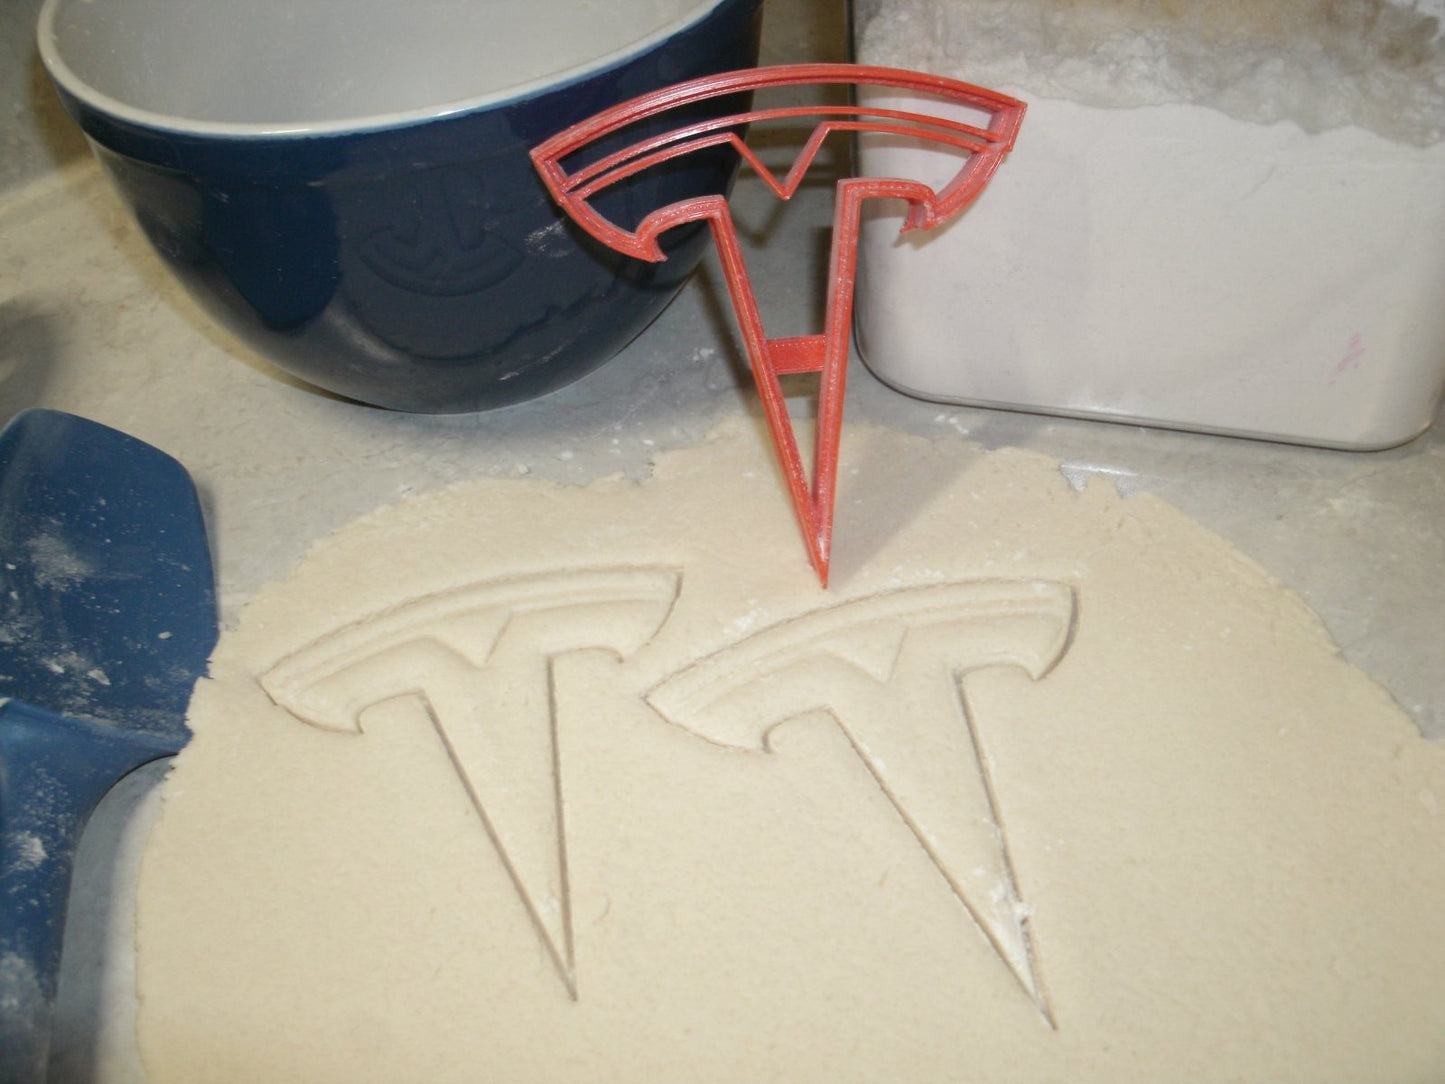 Tesla Brand Symbol Luxury Electric Vehicle Car Cookie Cutter Made in USA PR483